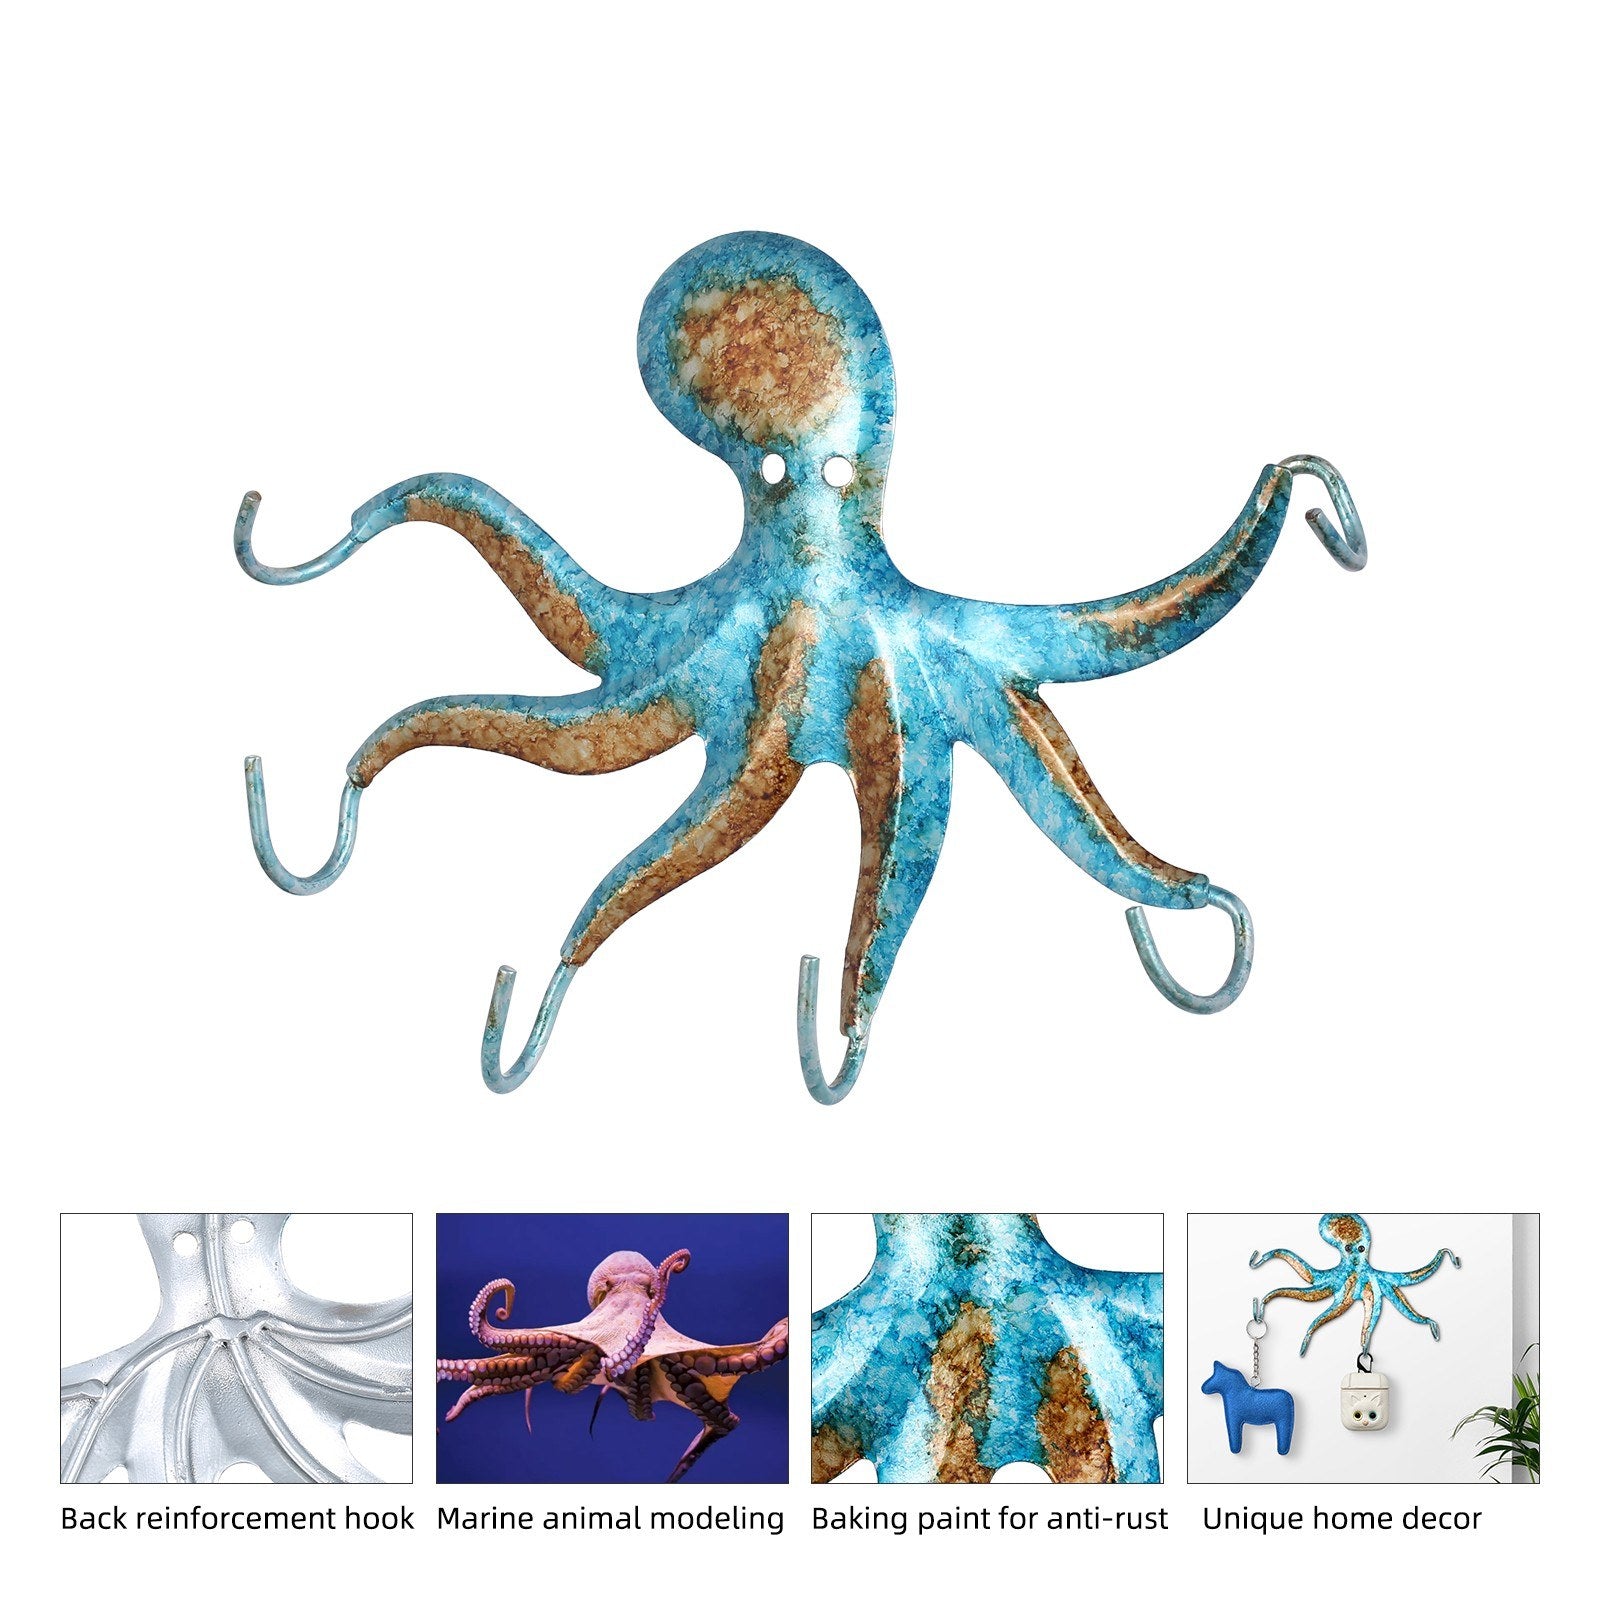 The octopus hook will not damage your walls and can be used in any room of the house